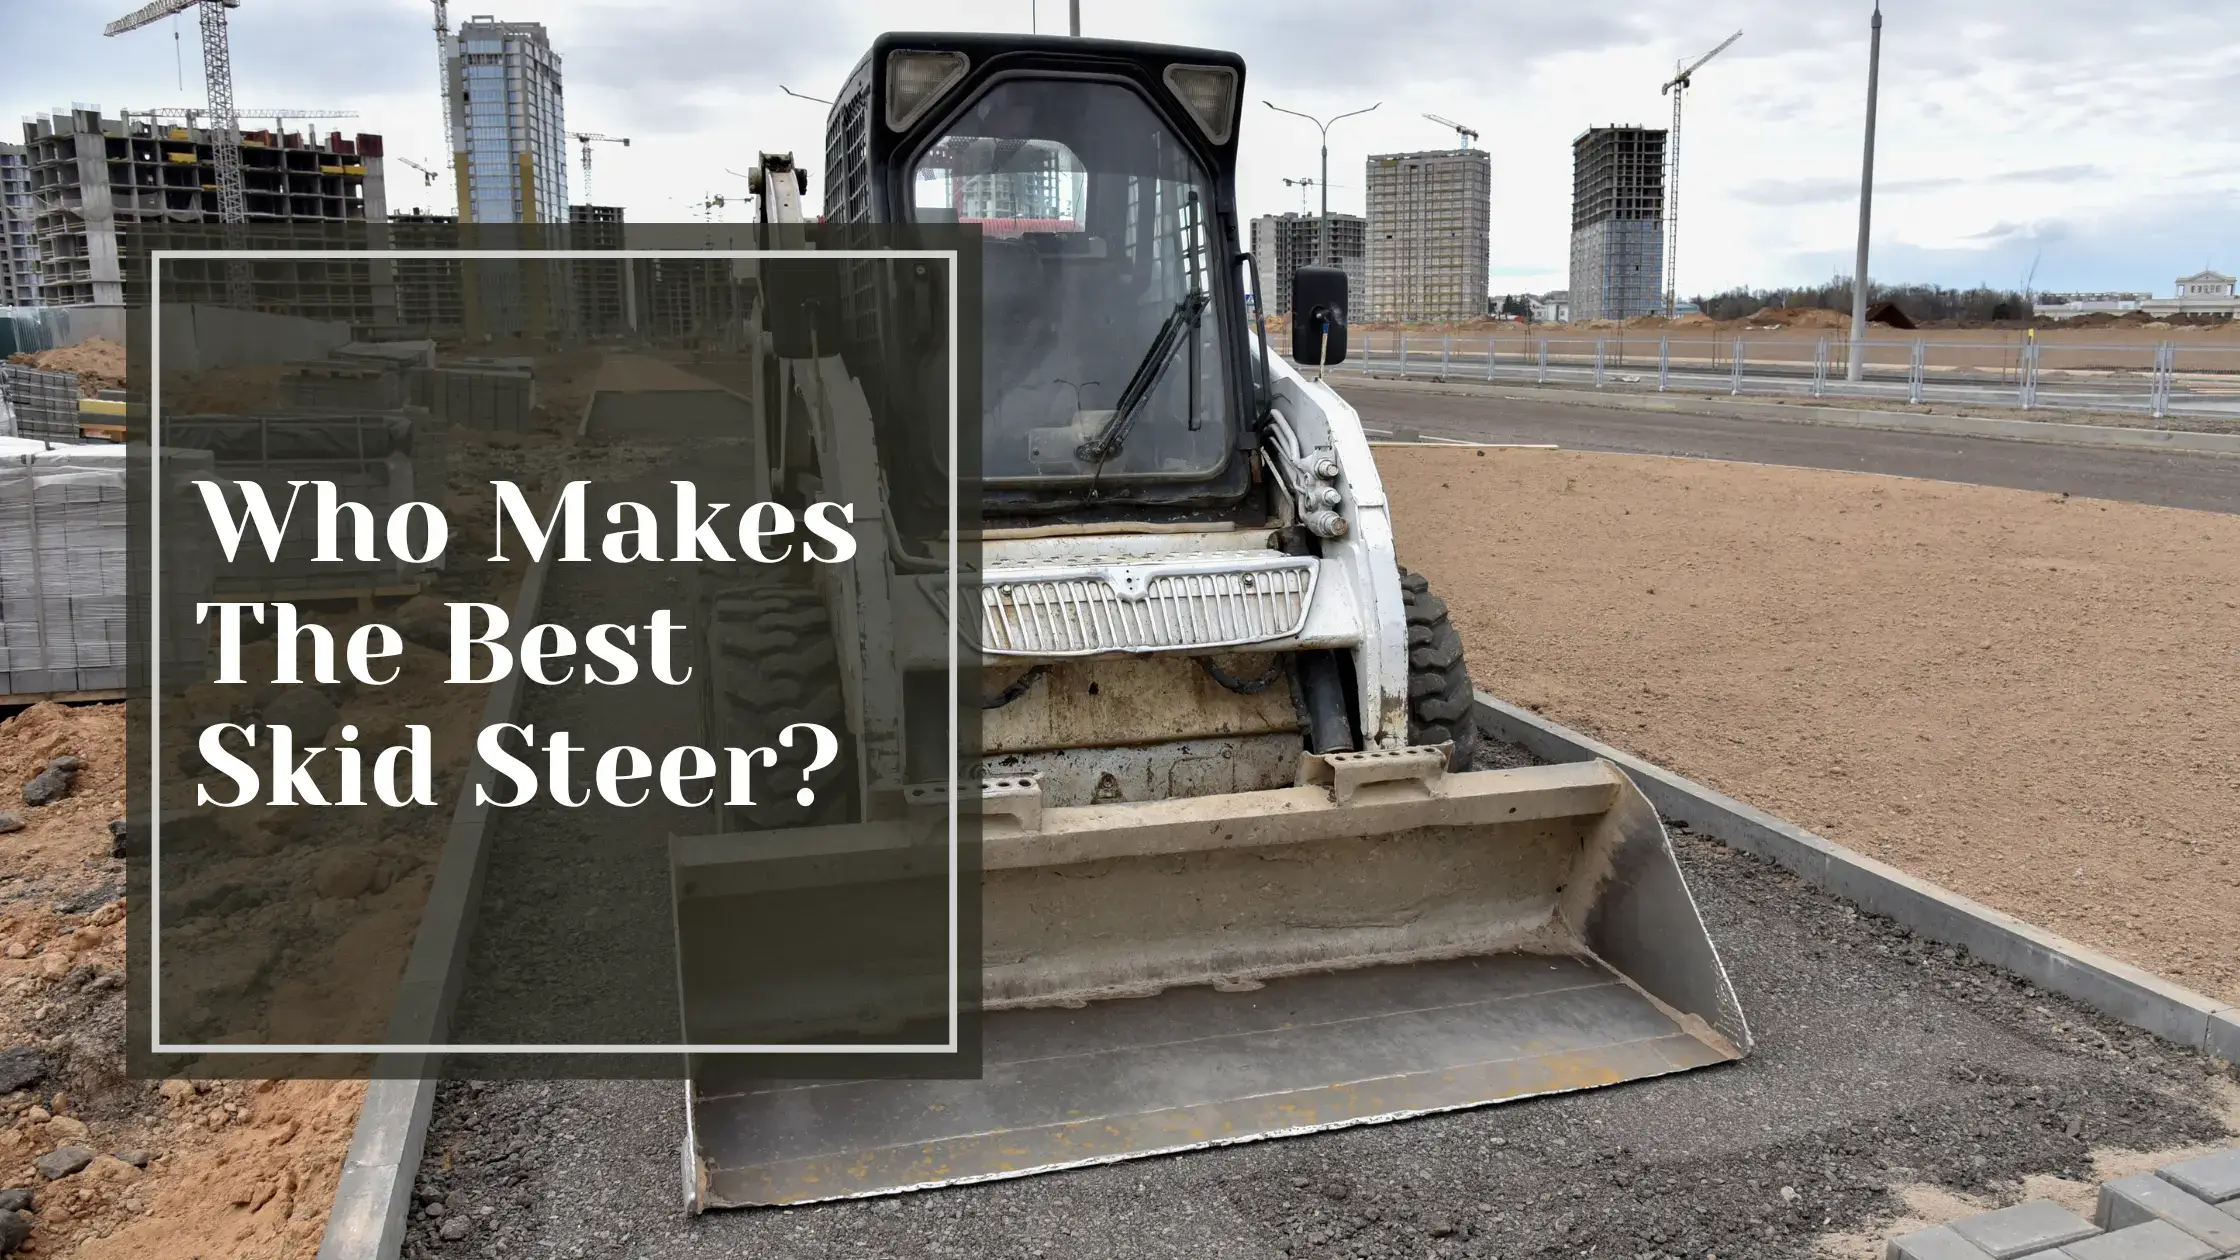 Who Makes The Best Skid Steer?